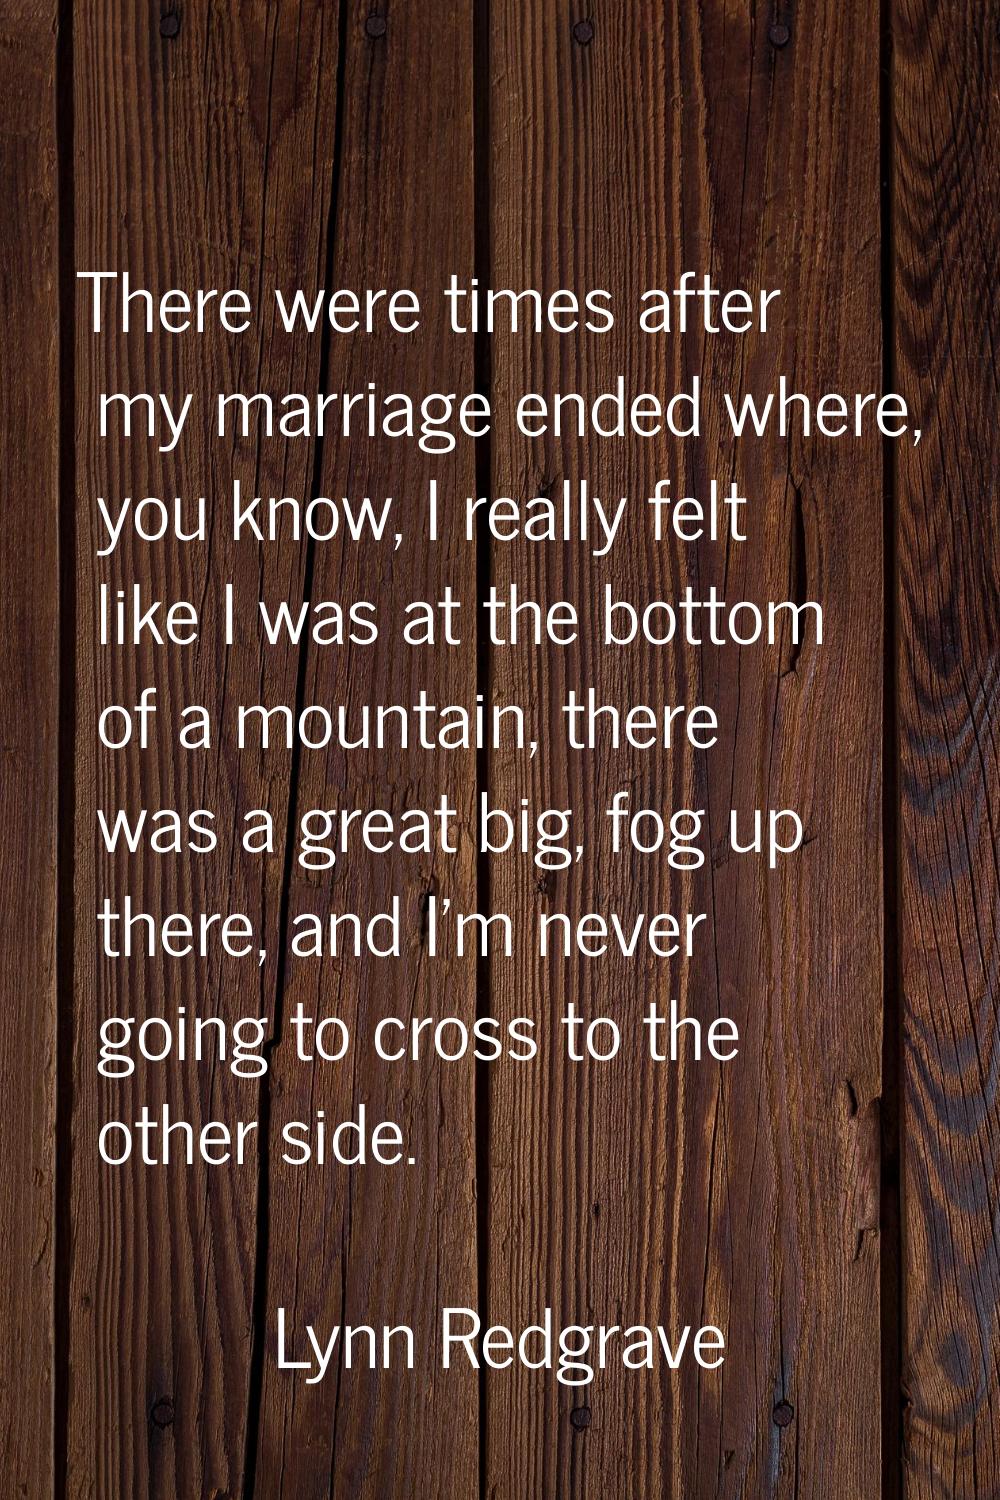 There were times after my marriage ended where, you know, I really felt like I was at the bottom of